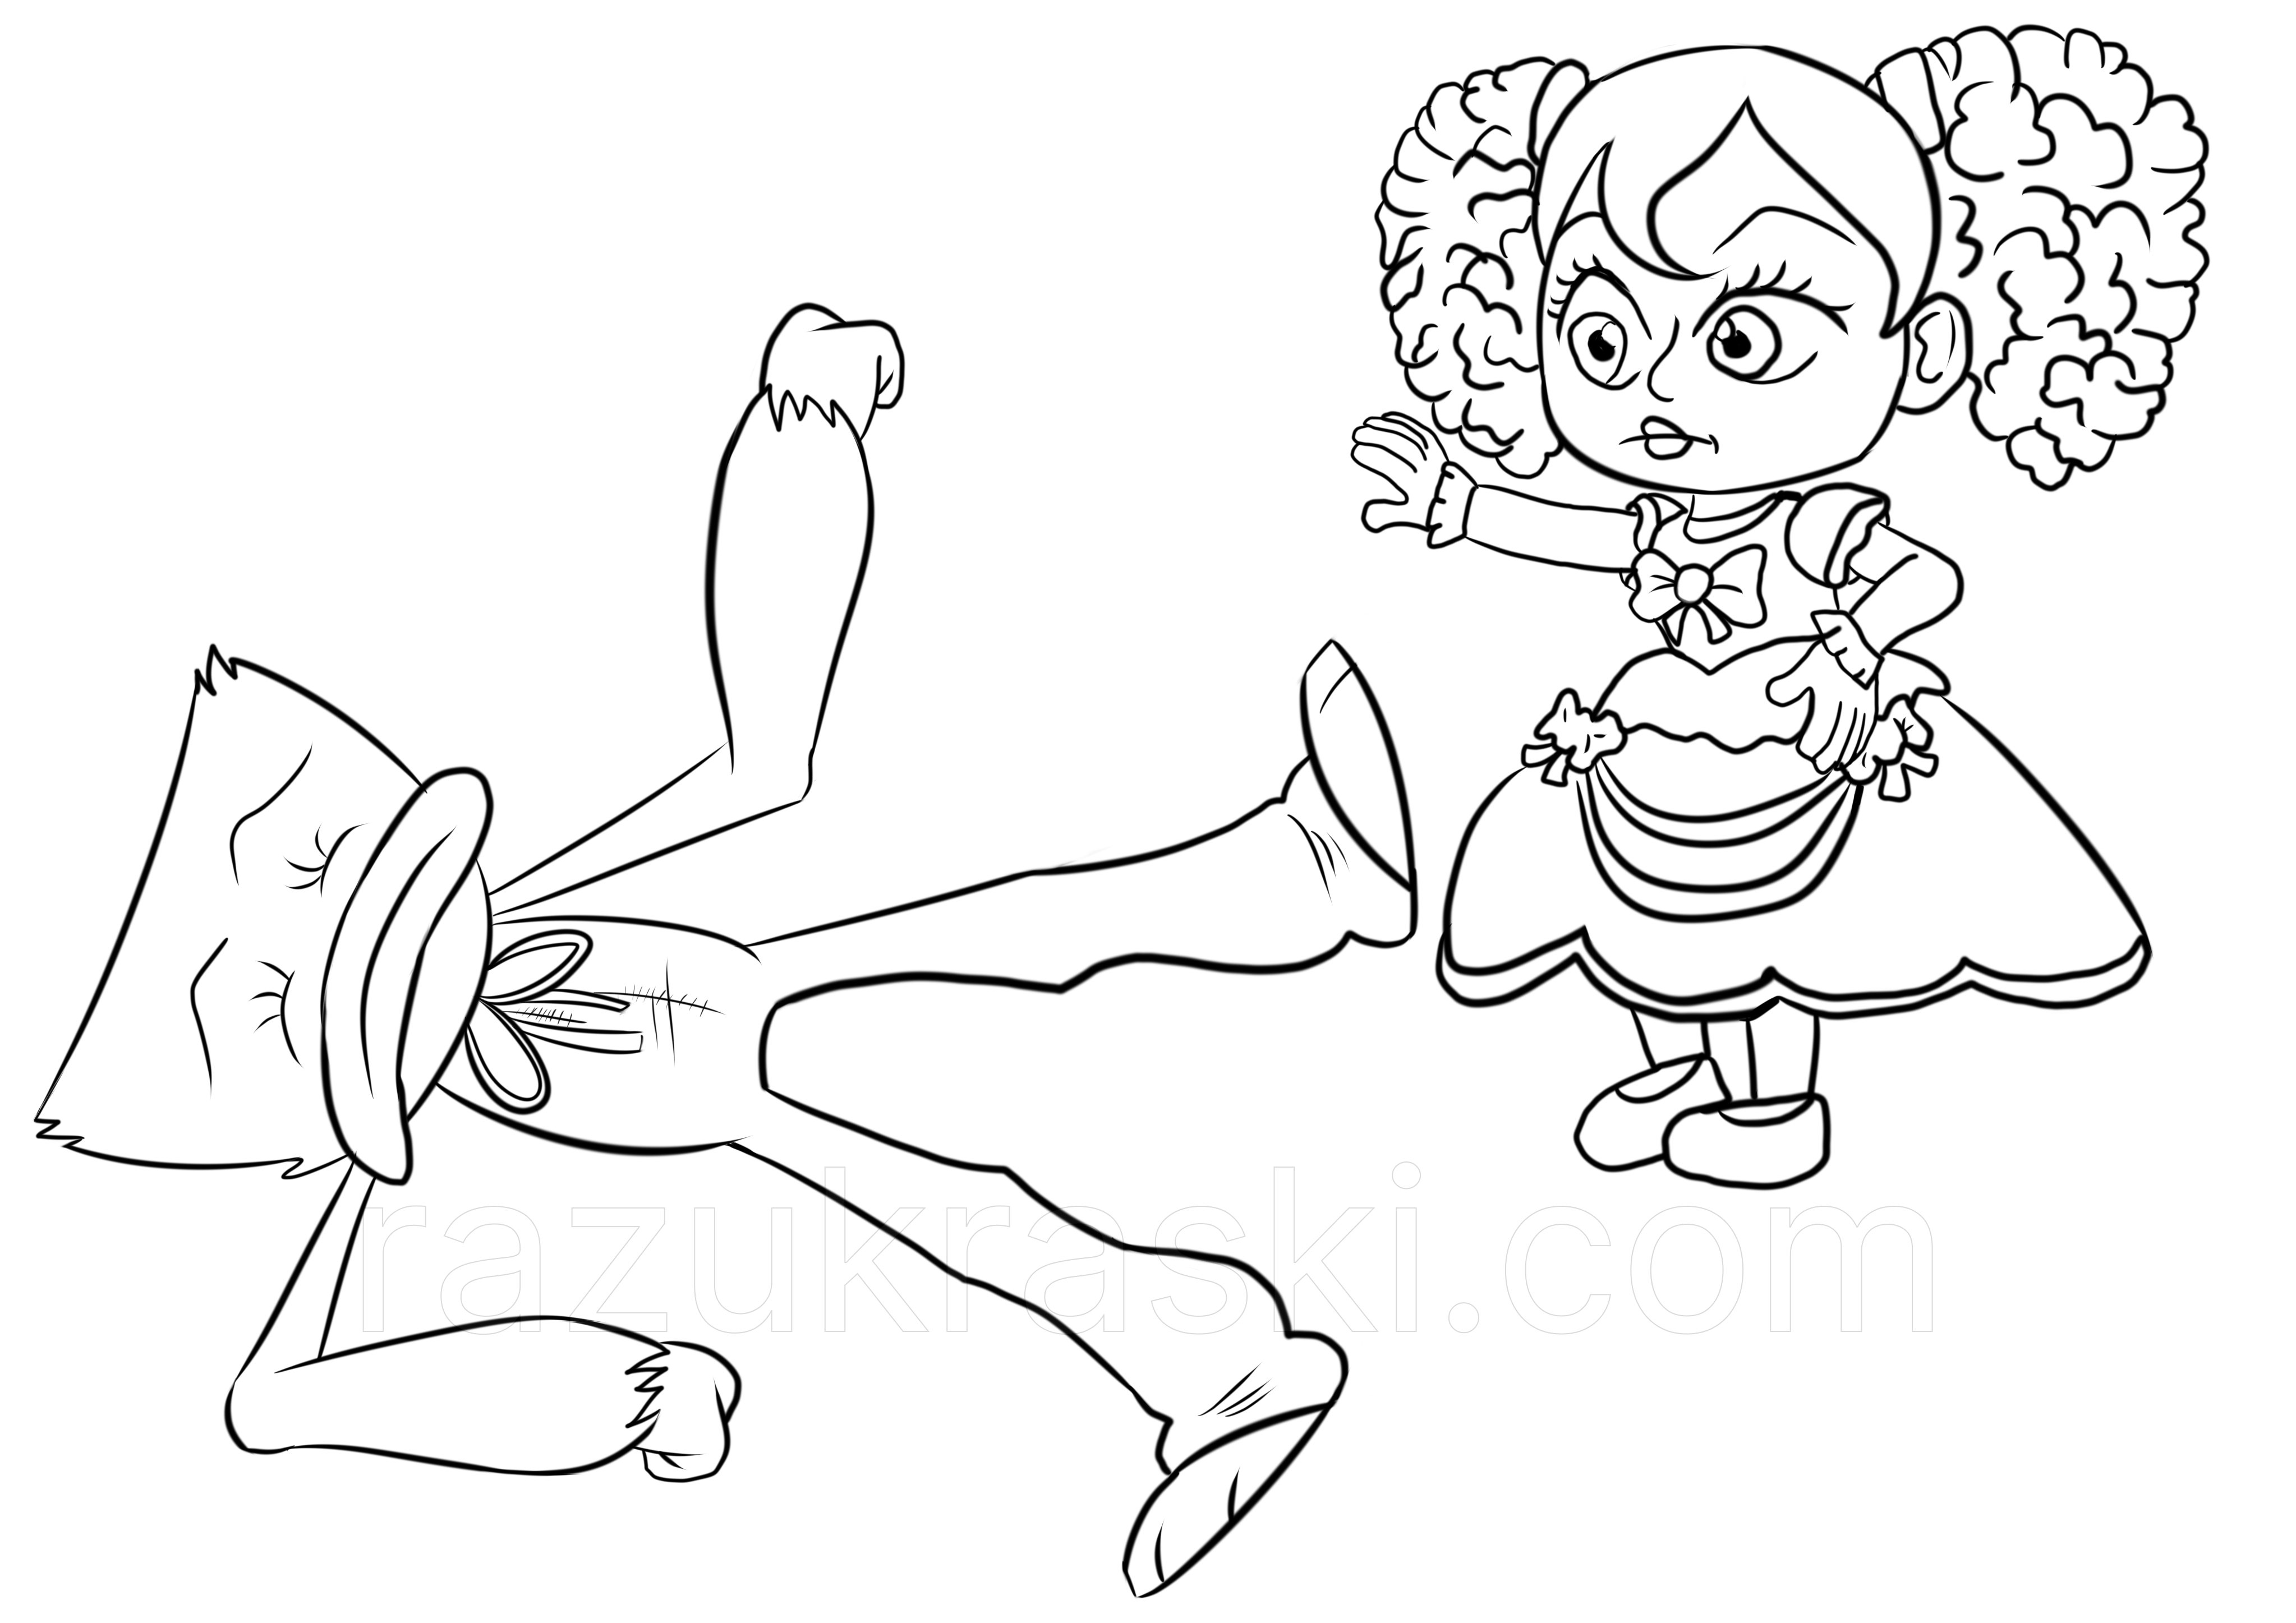 Coloring page Huggy Wuggy and a doll